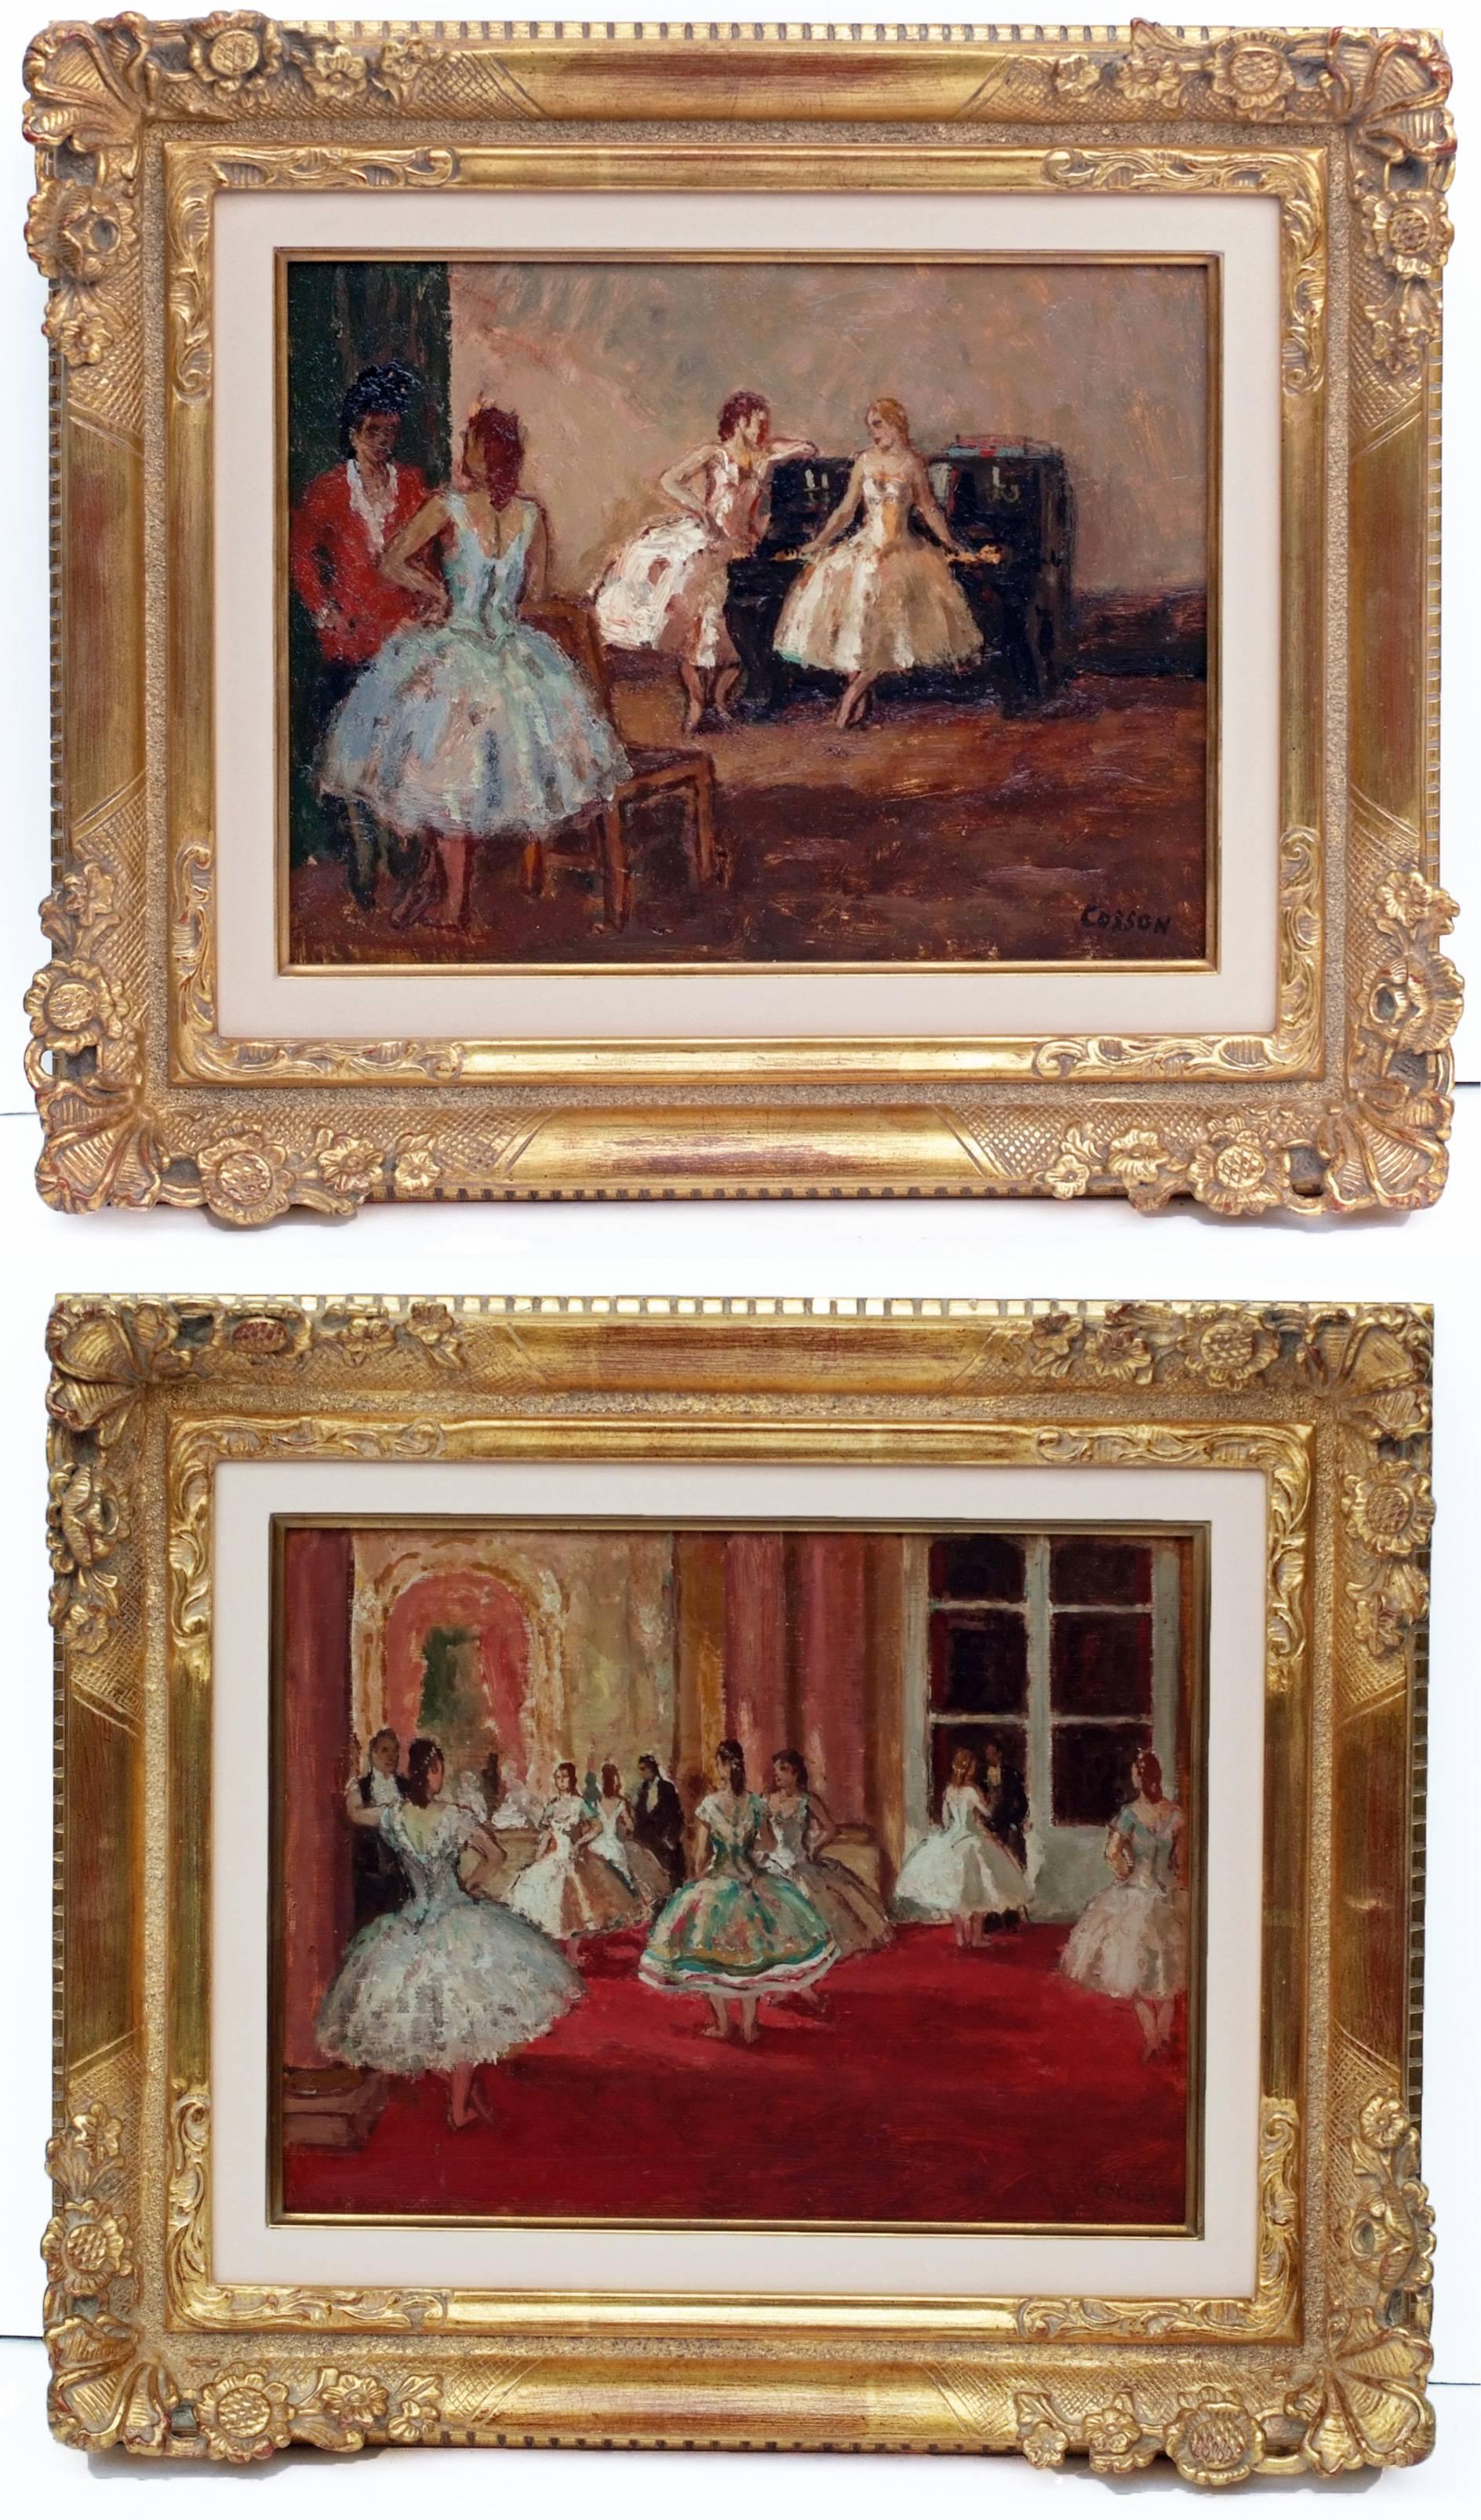 Jean-Louis-Marcel Cosson Interior Painting - Marcel COSSON (1878-1956) Painting Post-impressionist Opera Ballerinas in pair